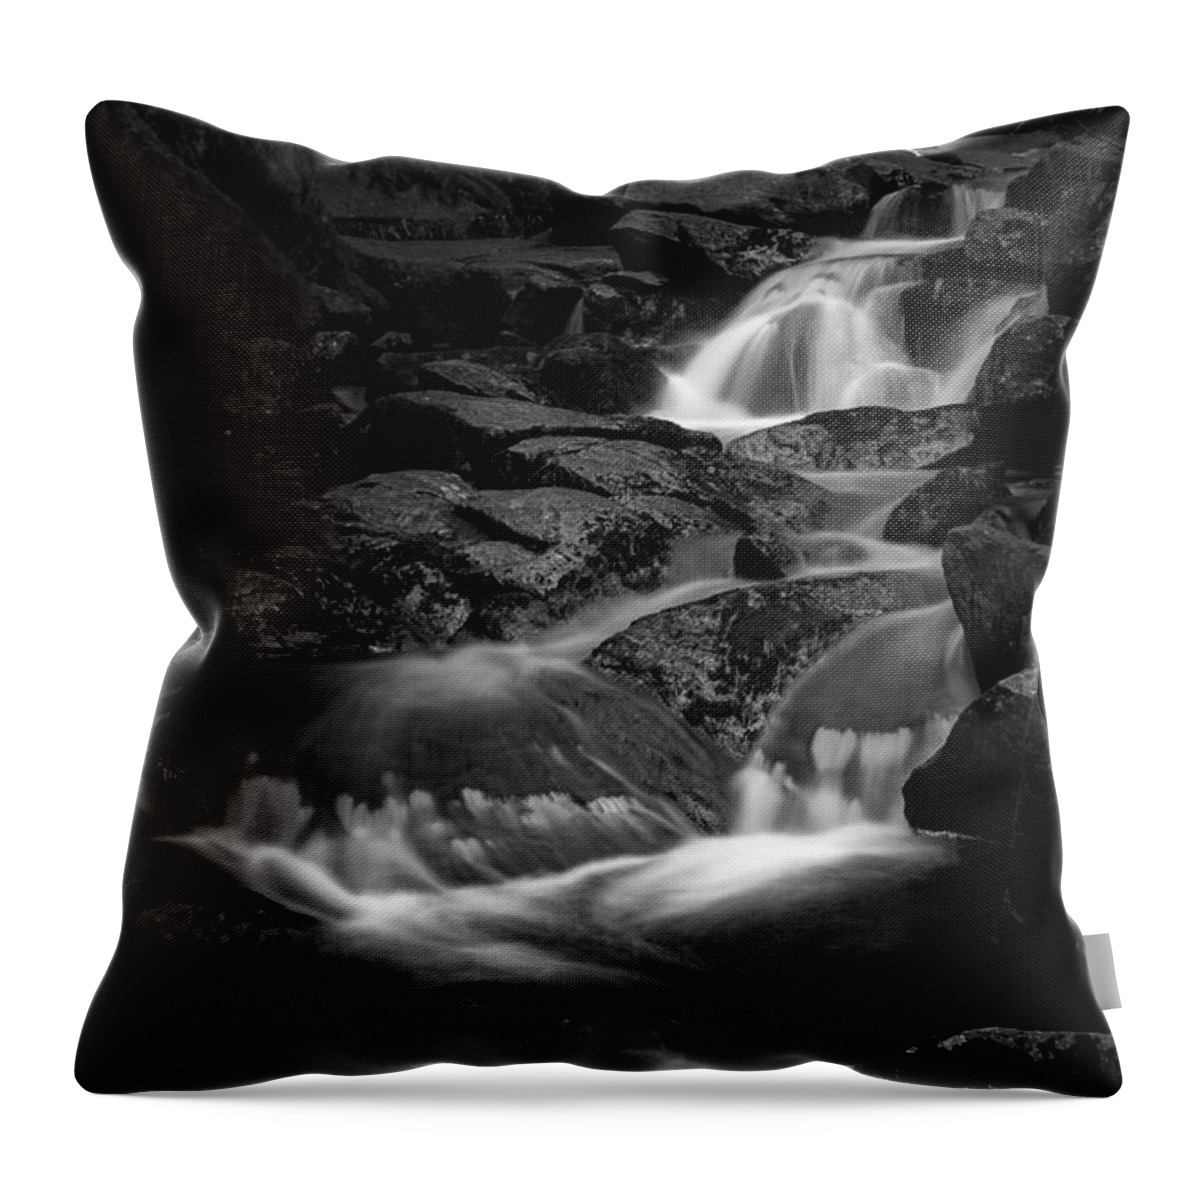 Bodefall Throw Pillow featuring the photograph Bodefall, Harz by Andreas Levi